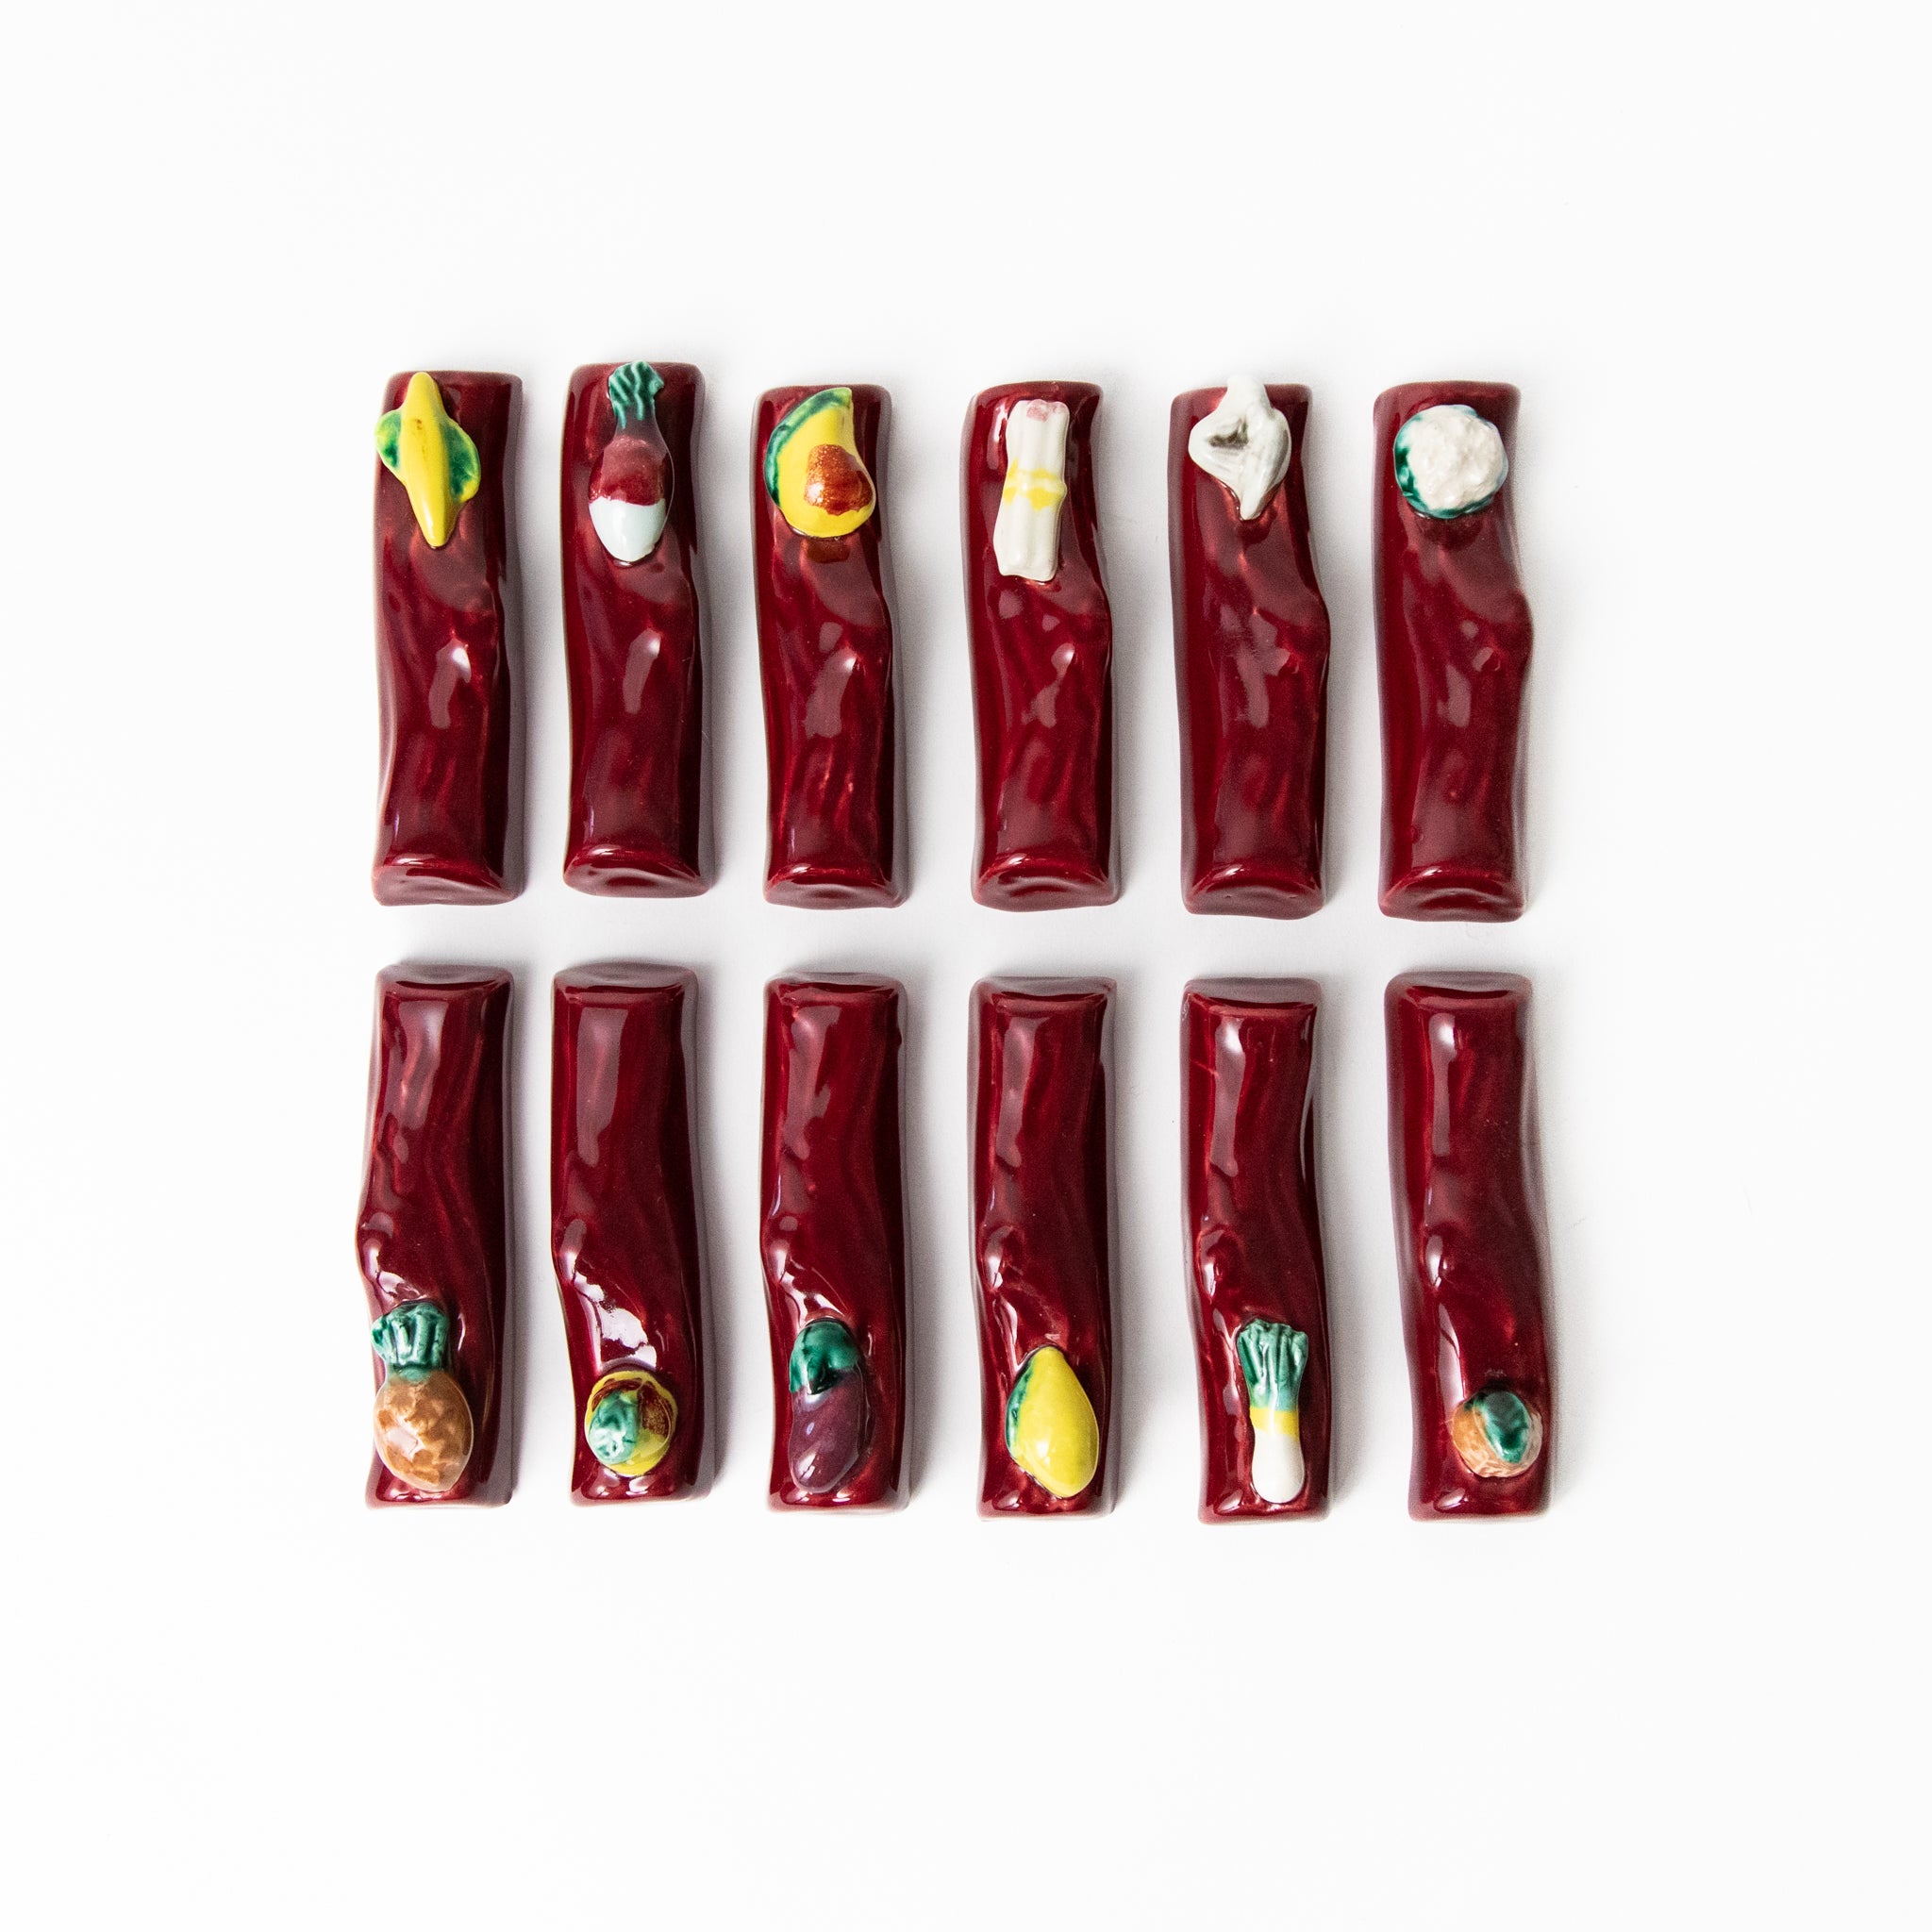 FRUITS AND VEGGIES CERAMIC KNIFE RESTS BY VALLAURIS, SET OF 12